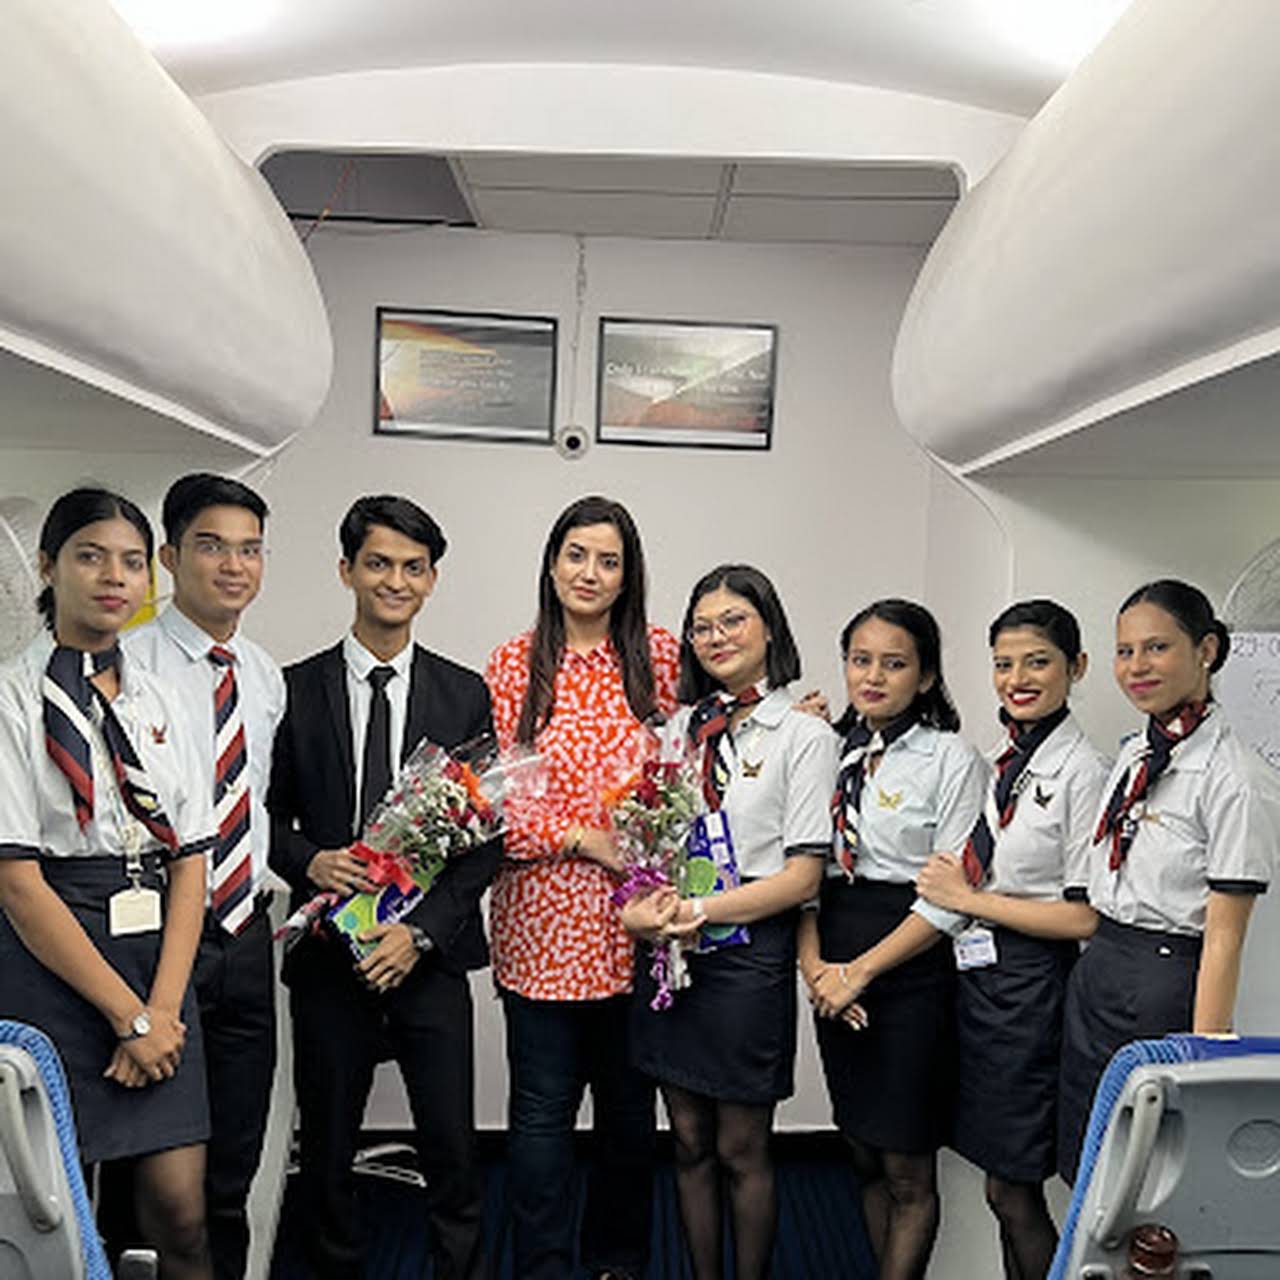 Our Students got selected as a Cabin Crew in Reputed Airlines